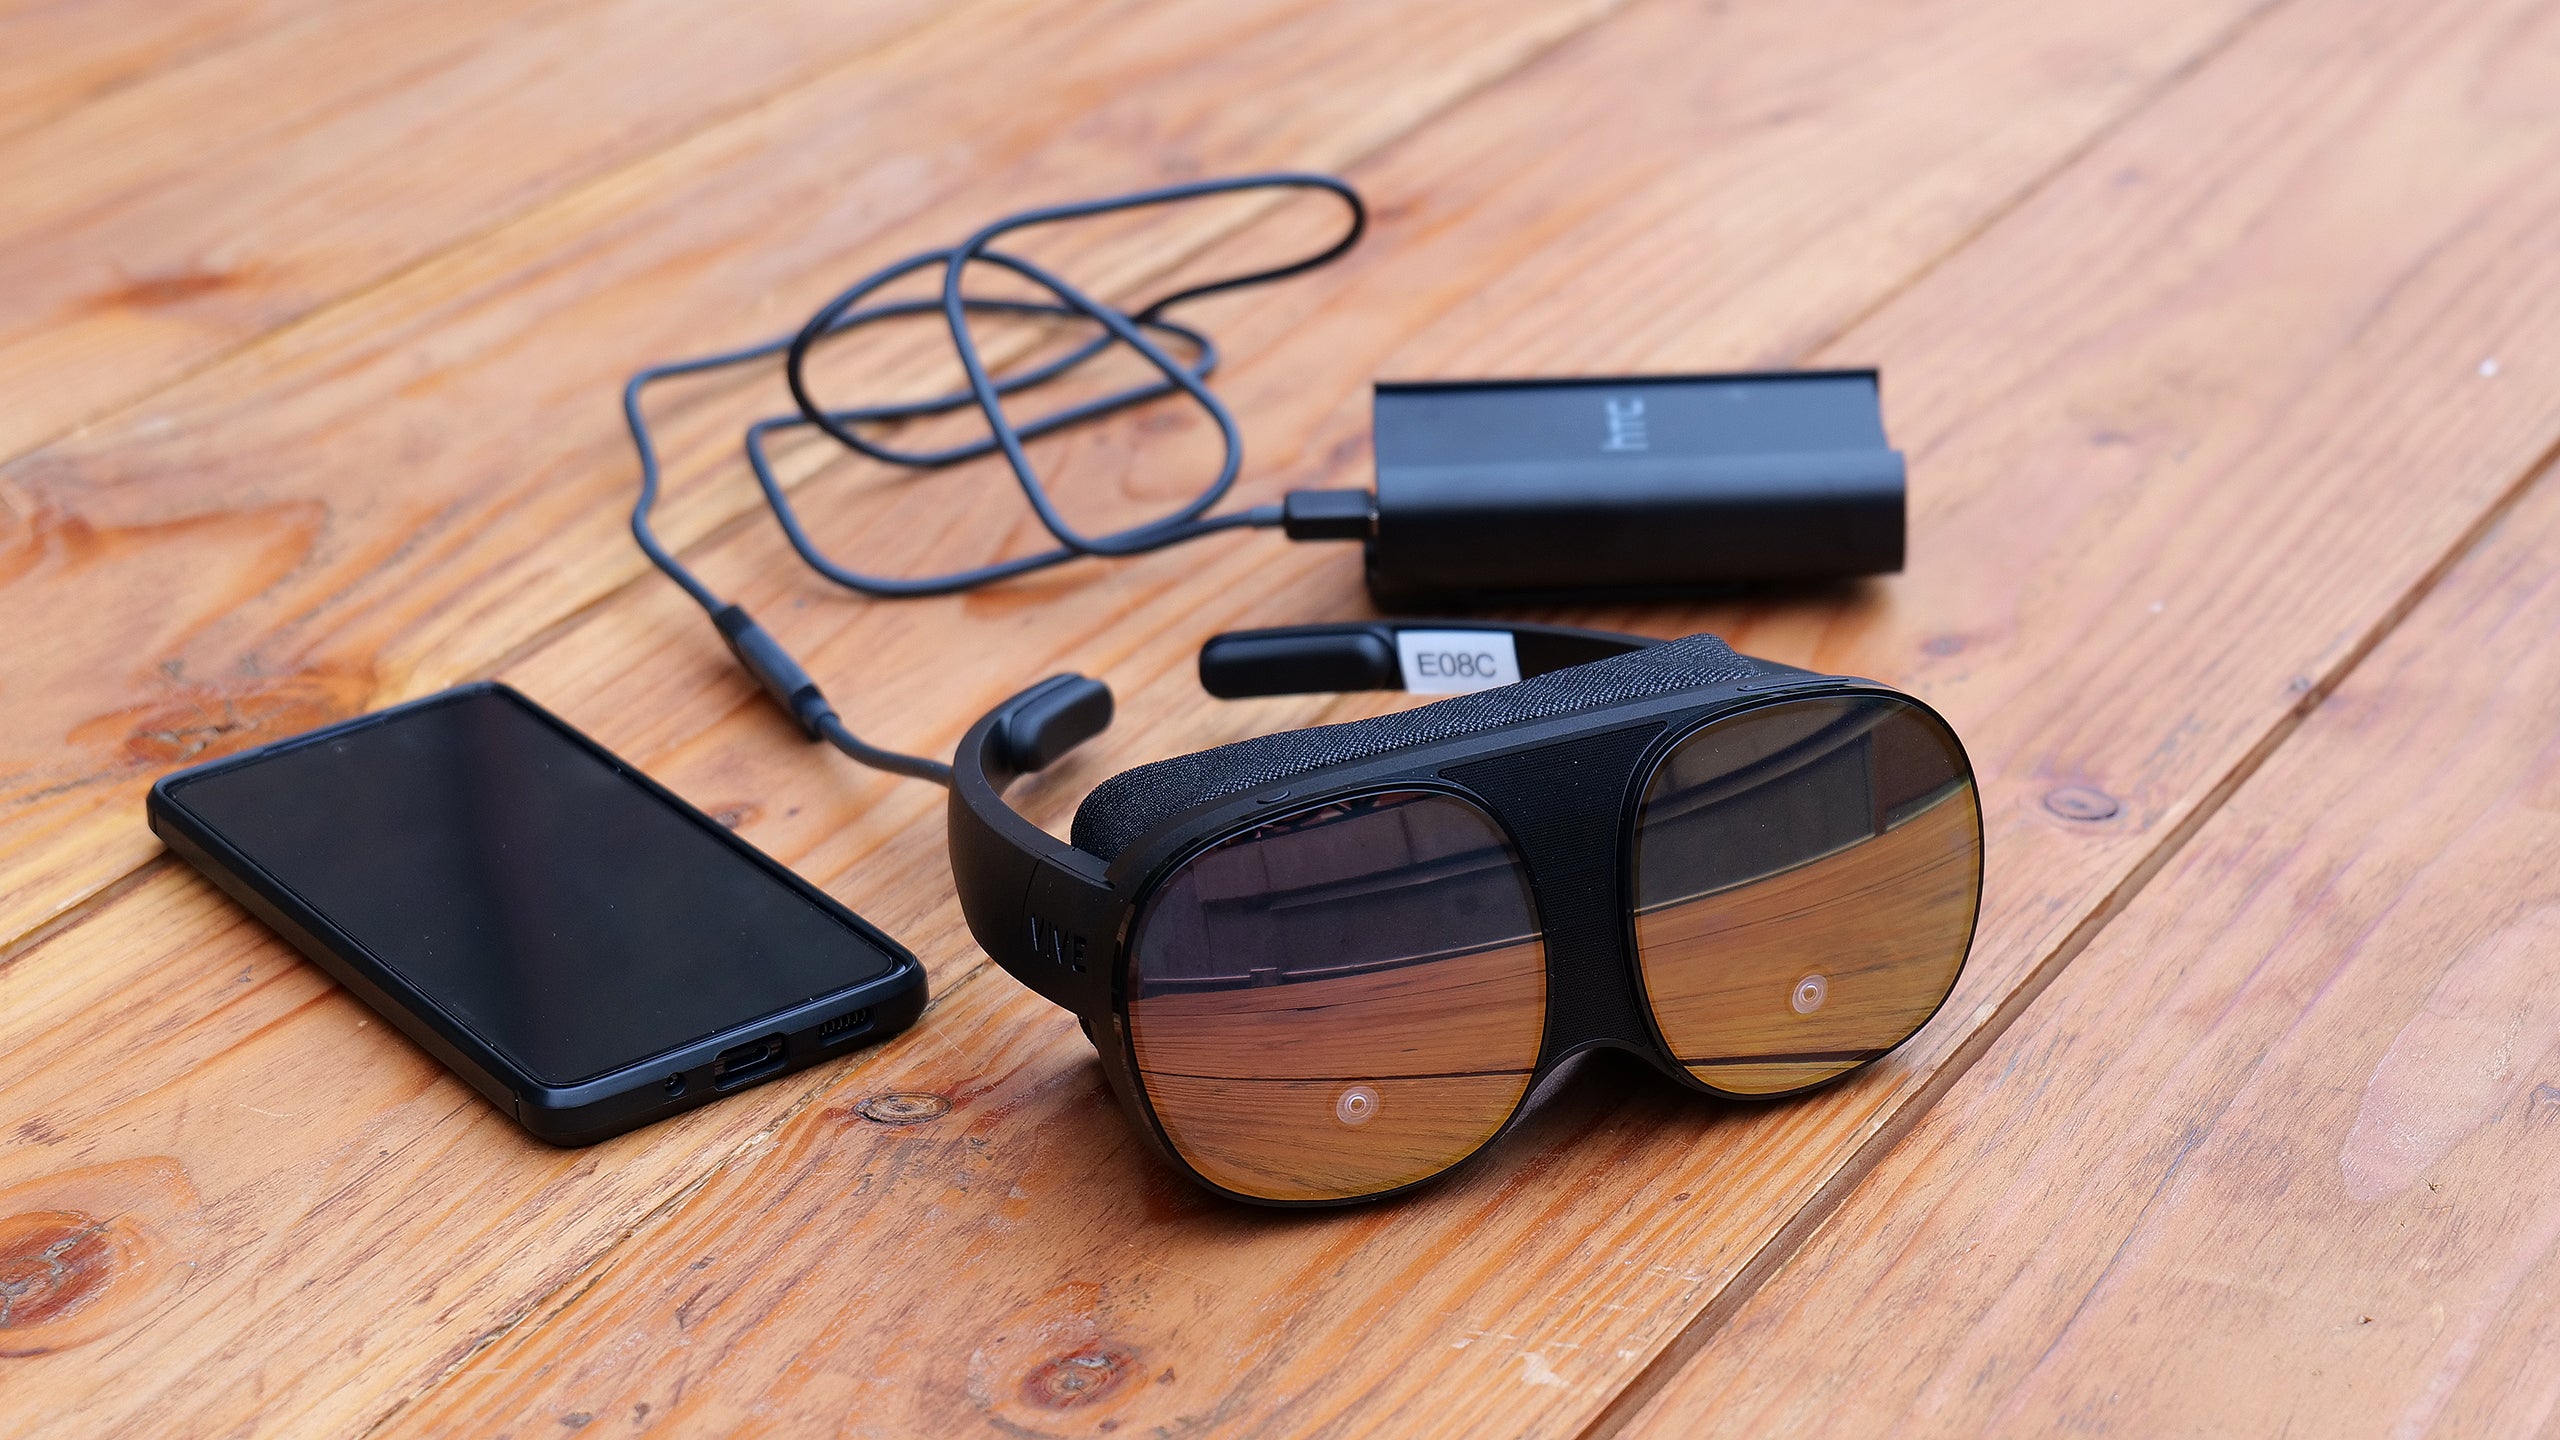 The Flow relies on an external battery connected via USB-C for power and a wireless connection to your phone for controls and visuals.  (Photo: Sam Rutherford)